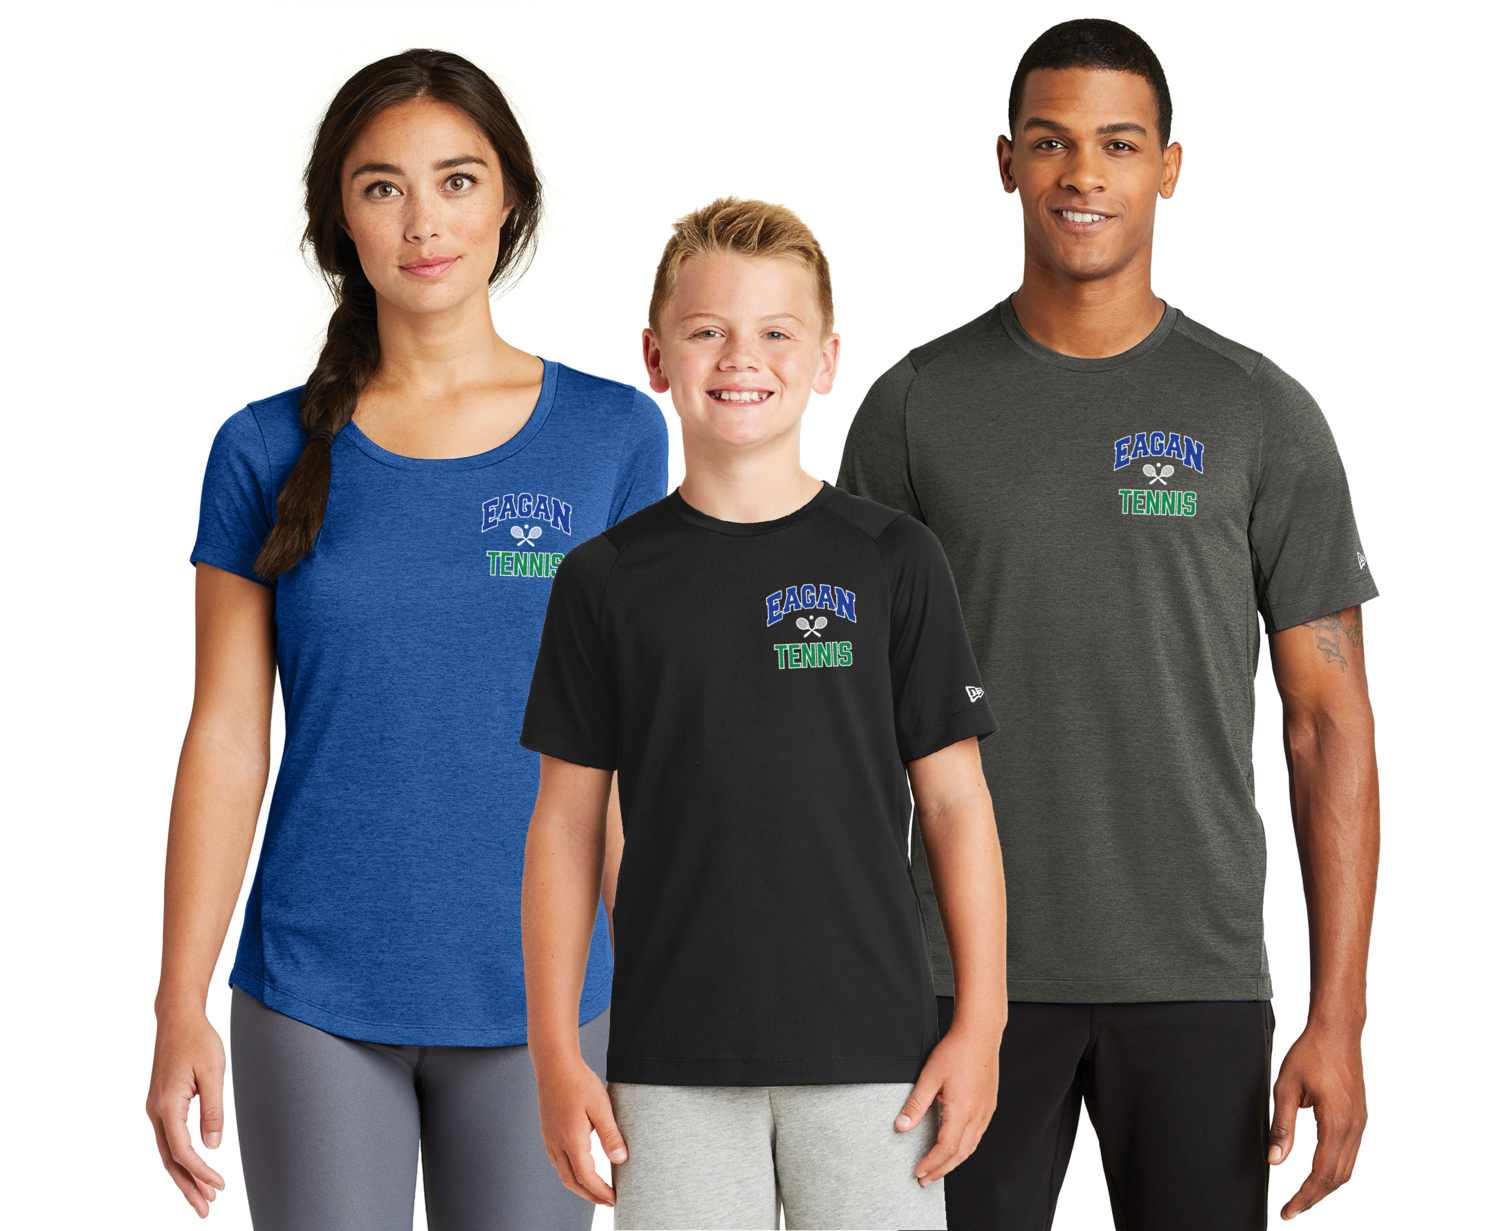 Eagan Tennis Performance Crew Tee - Adult and Youth